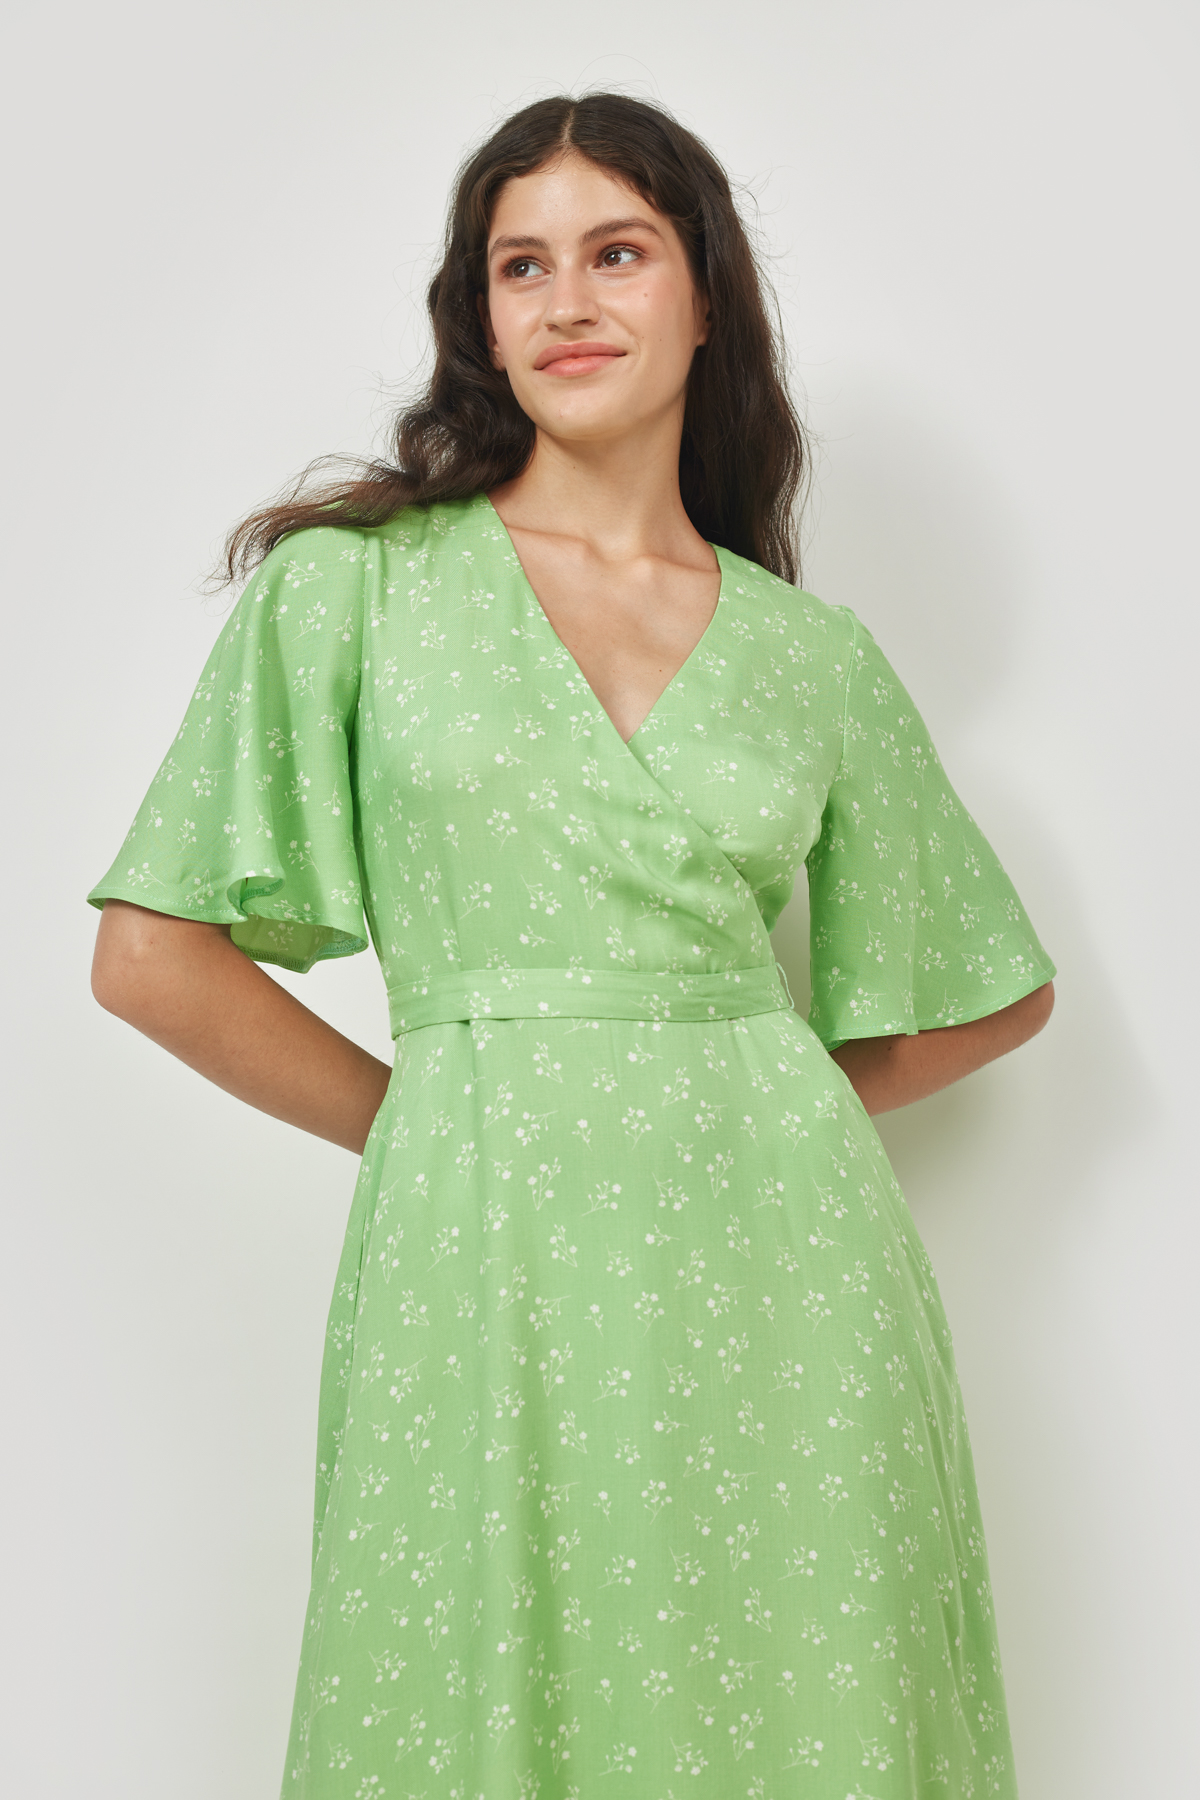 Midi dress in mint viscose with floral print, photo 3